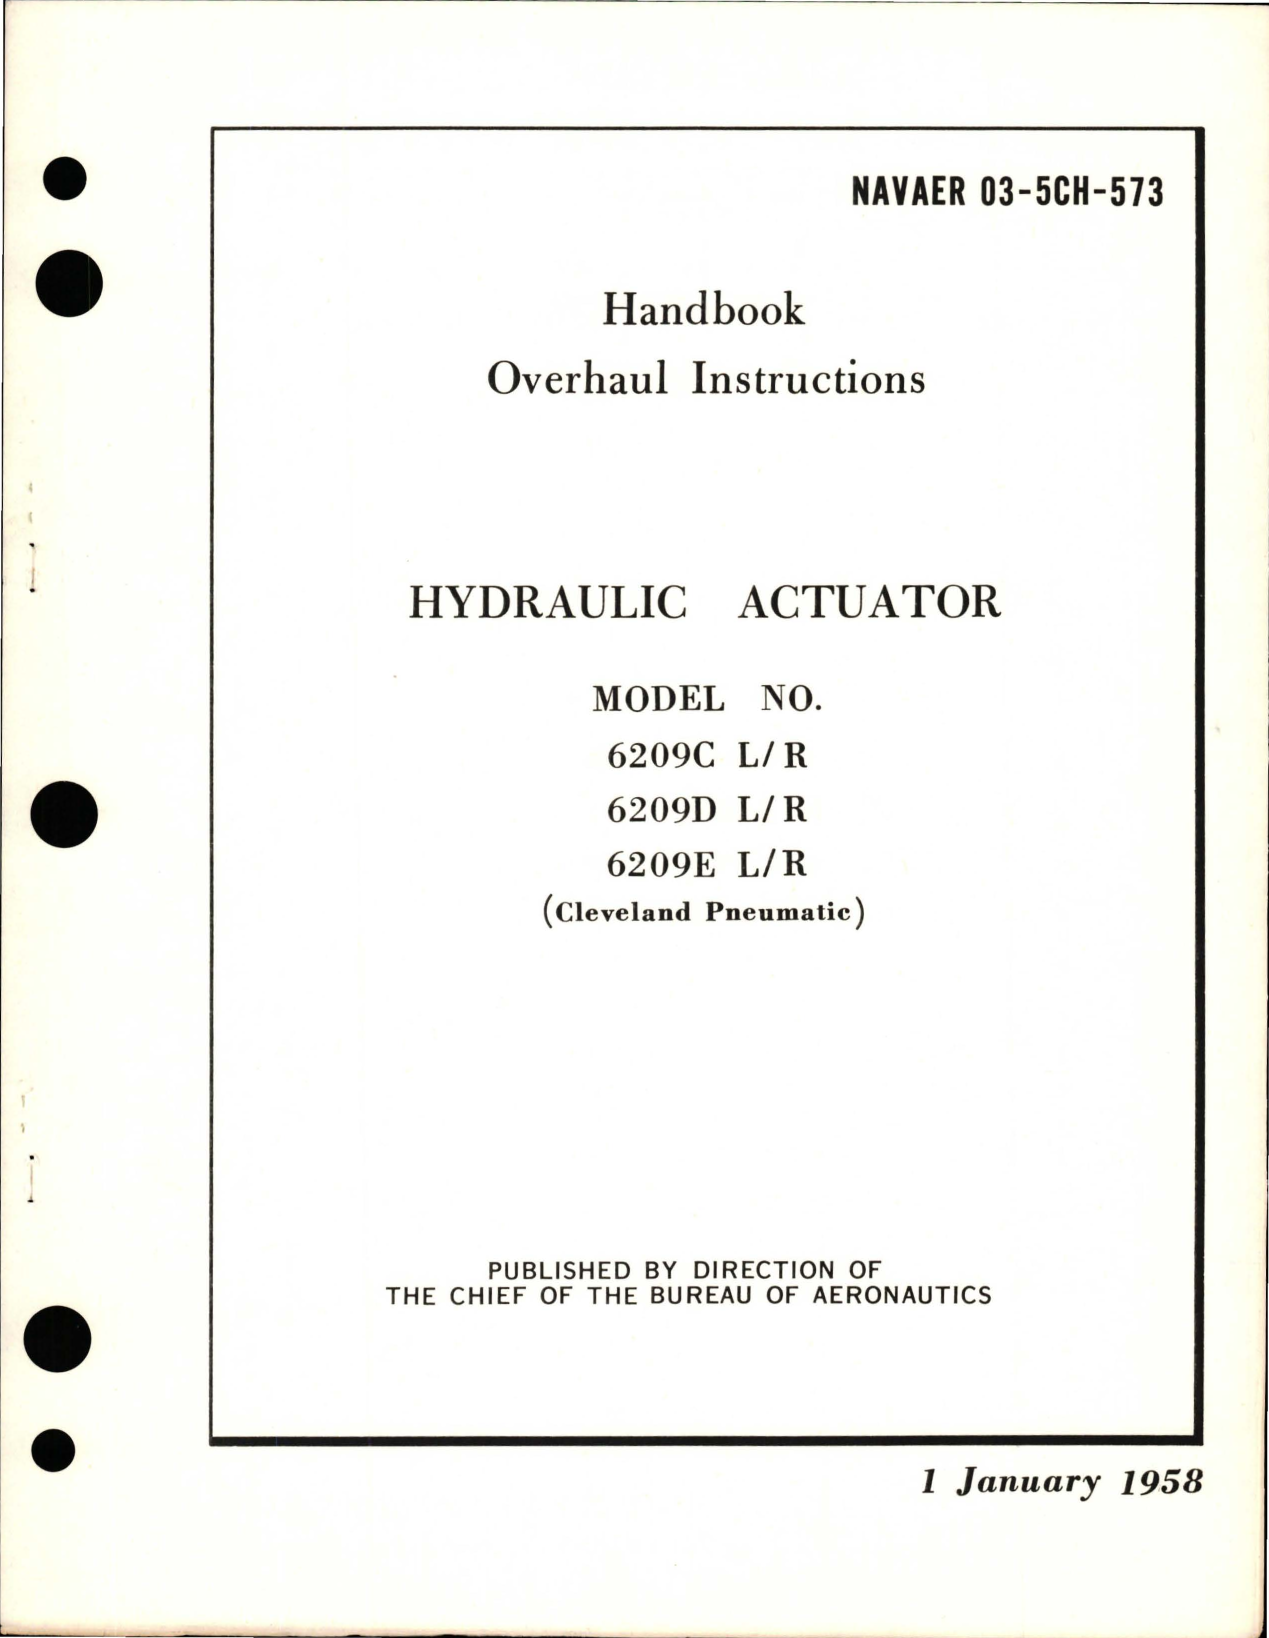 Sample page 1 from AirCorps Library document: Overhaul Instructions for Hydraulic Actuator - Models 6209C, 6209D, and 6209E 